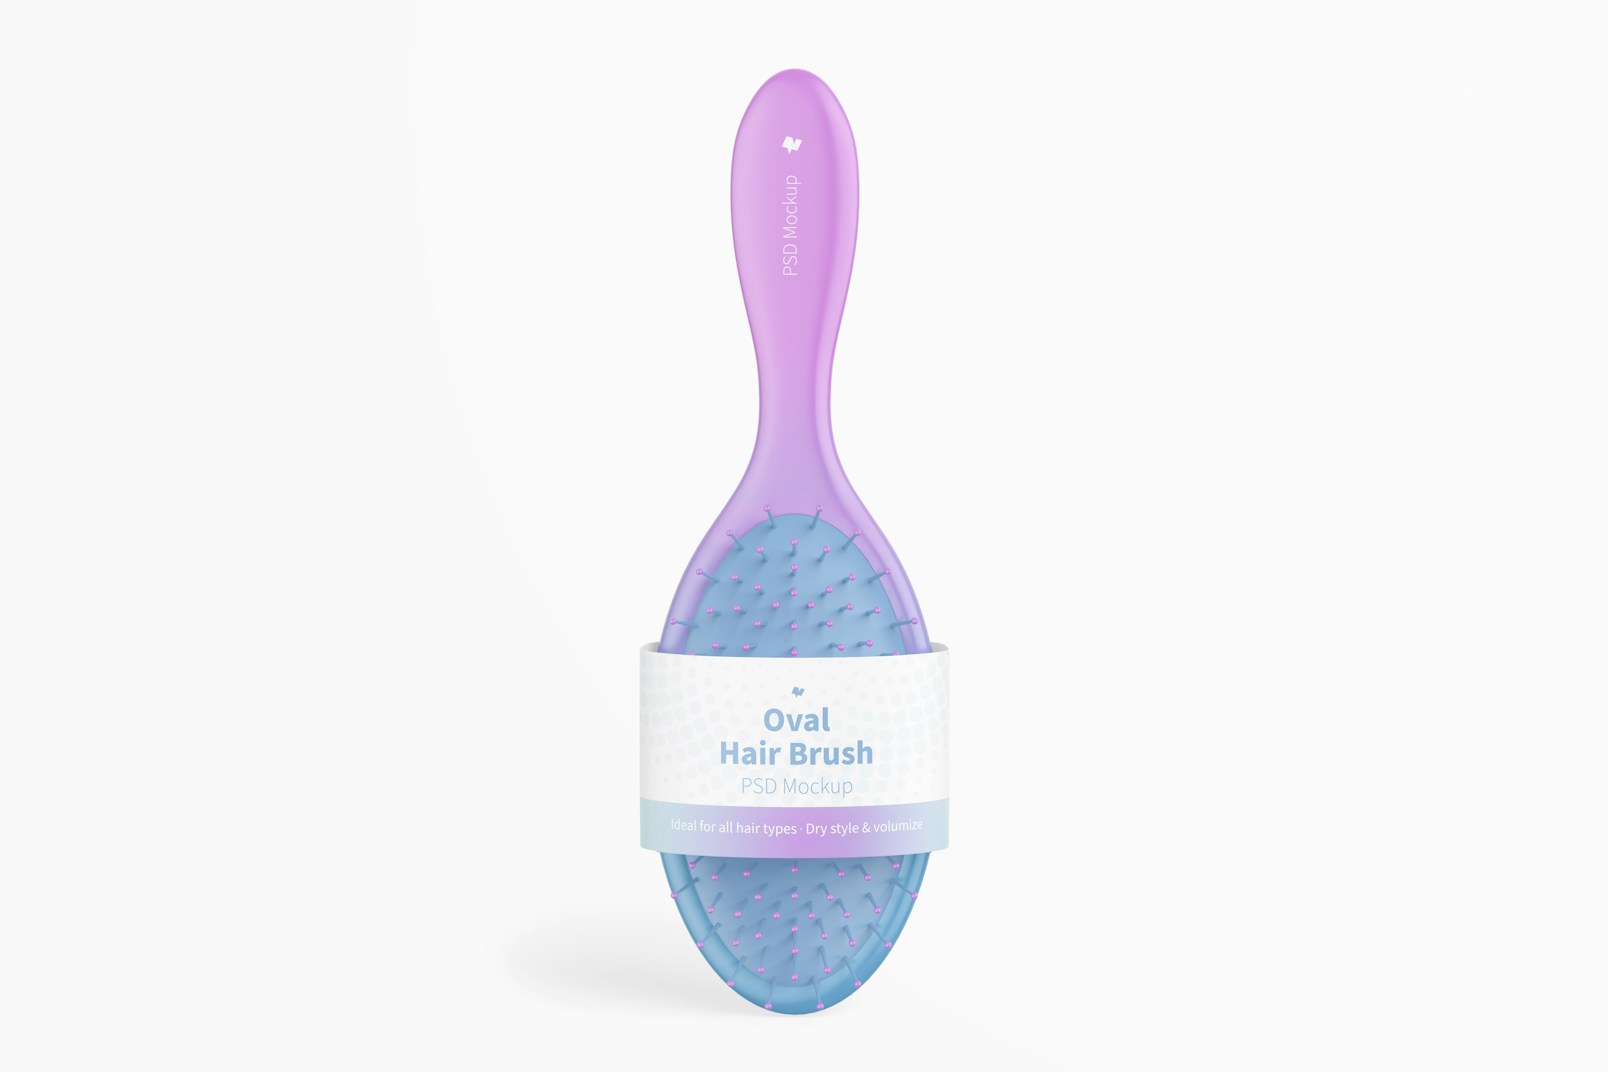 Oval Hair Brush with Label Mockup, Front View